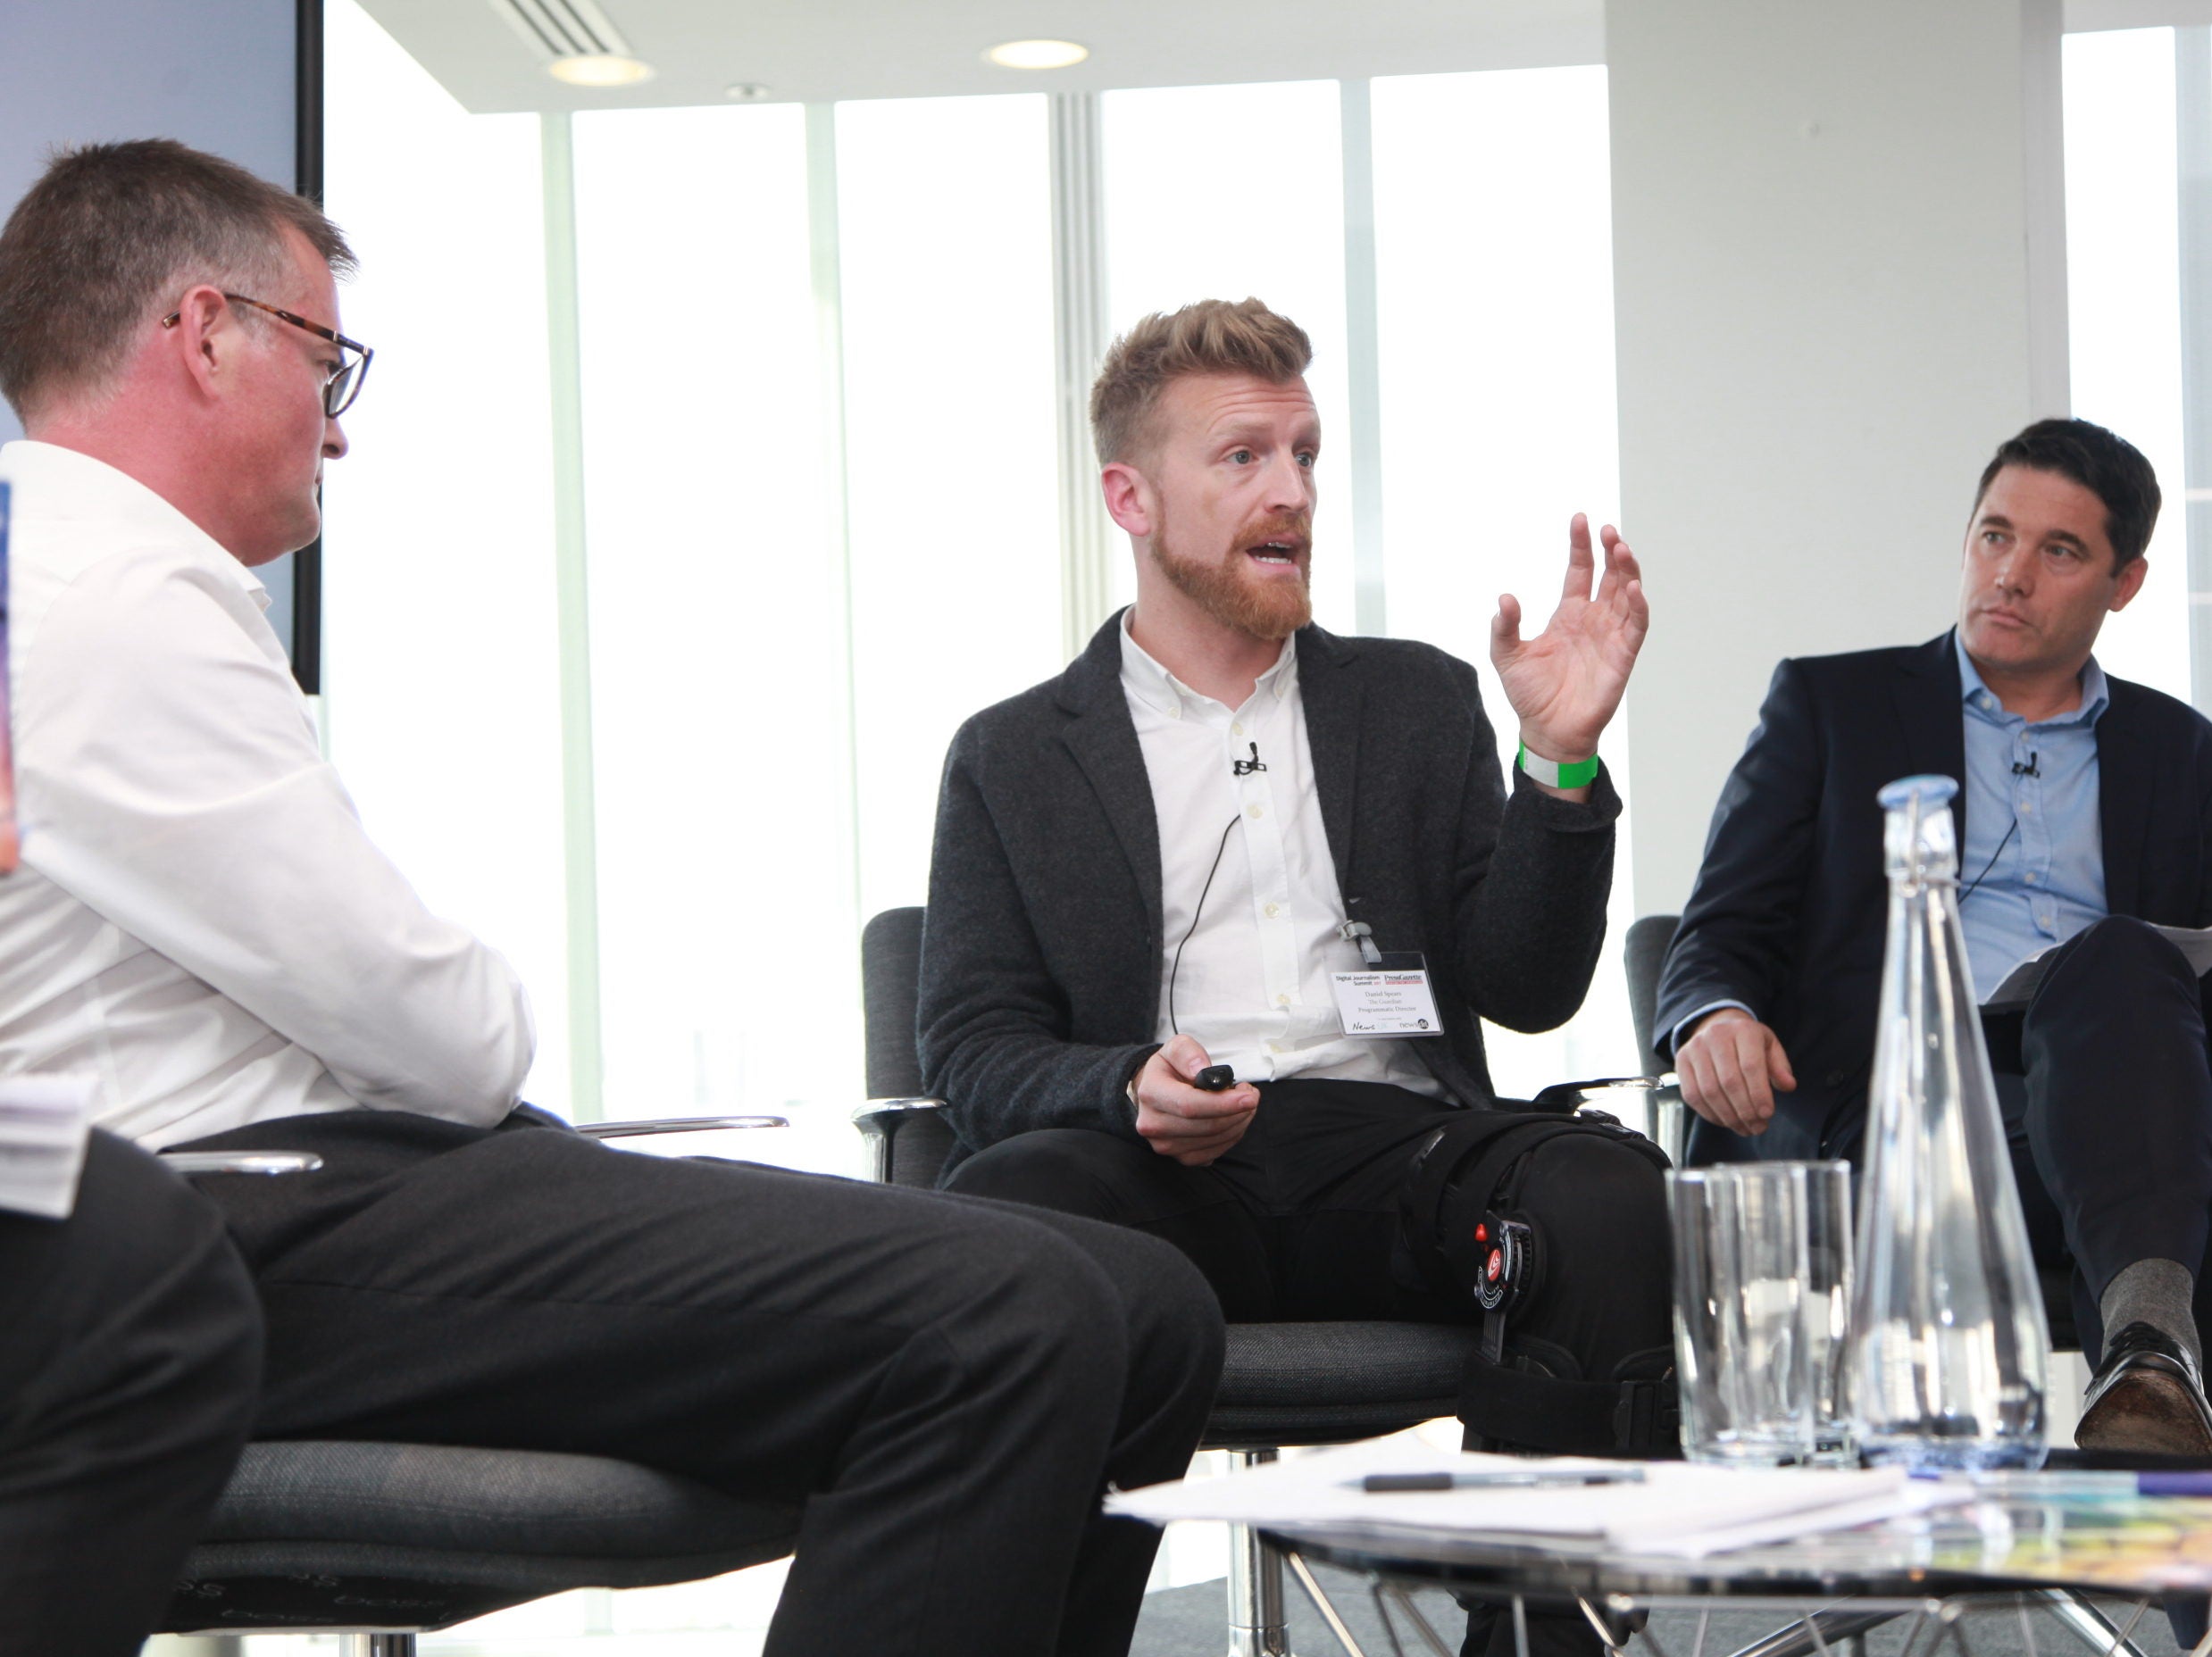 Digital Summit: News industry has been 'too slow to move from burning platforms', claims agency boss